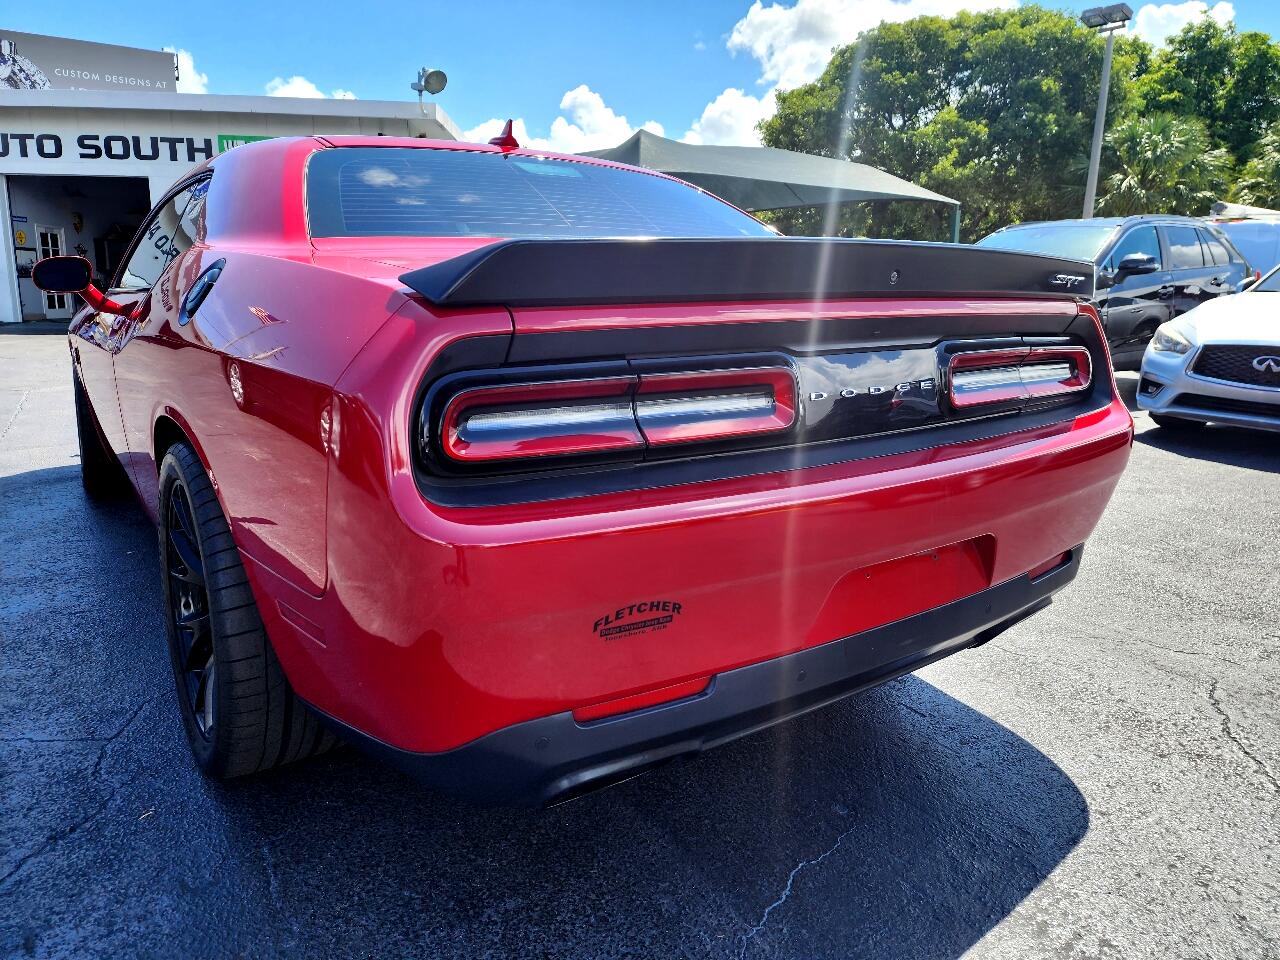 2016 DODGE Challenger Coupe - $52,495